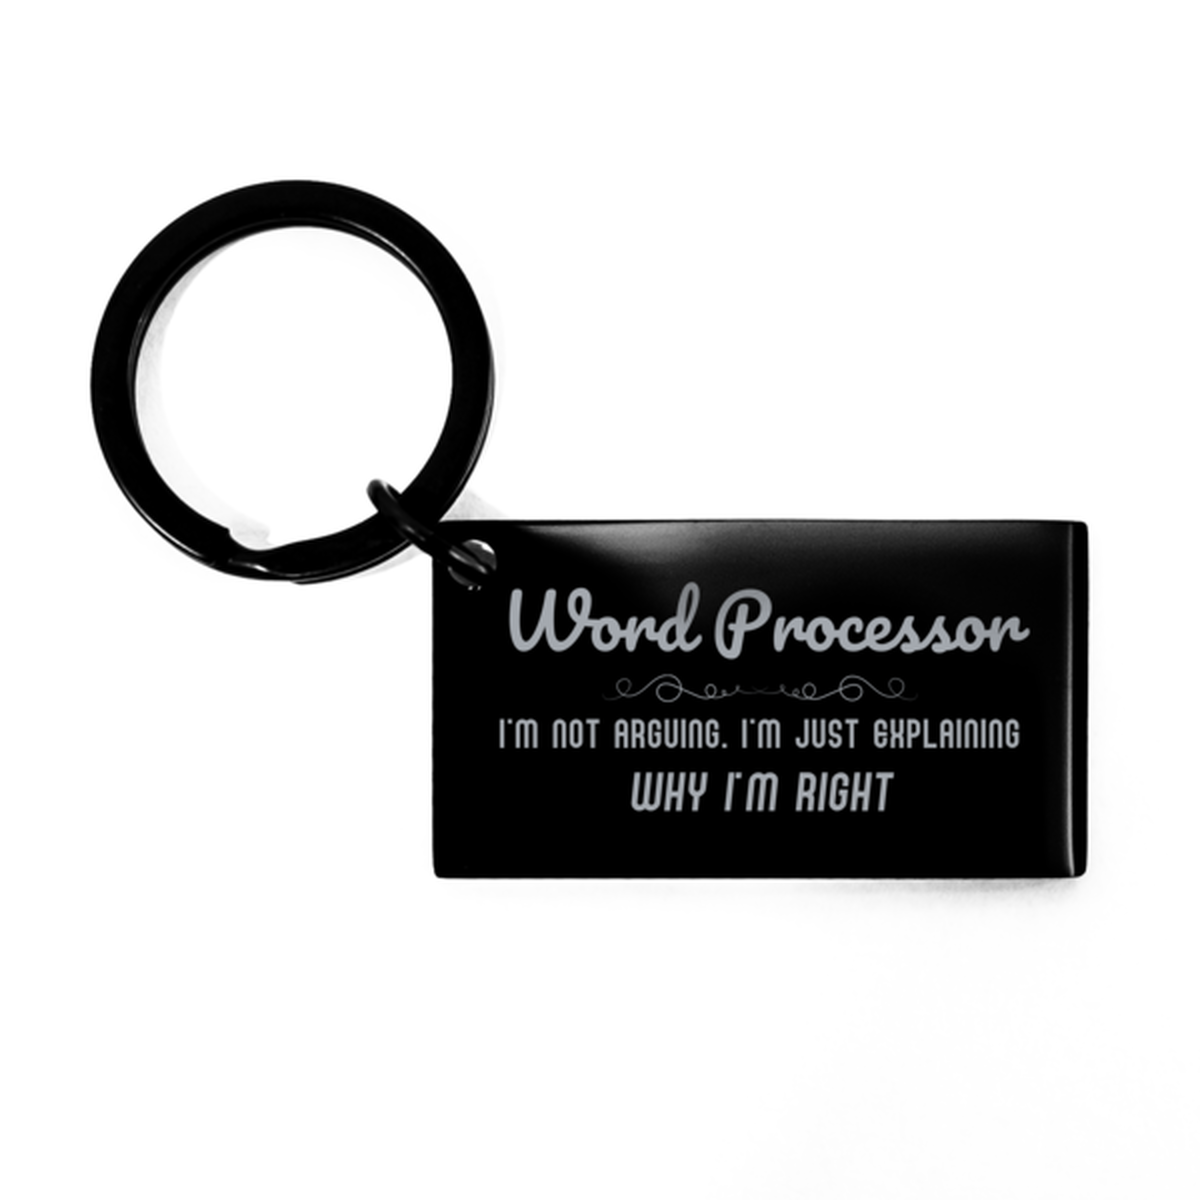 Word Processor I'm not Arguing. I'm Just Explaining Why I'm RIGHT Keychain, Funny Saying Quote Word Processor Gifts For Word Processor Graduation Birthday Christmas Gifts for Men Women Coworker